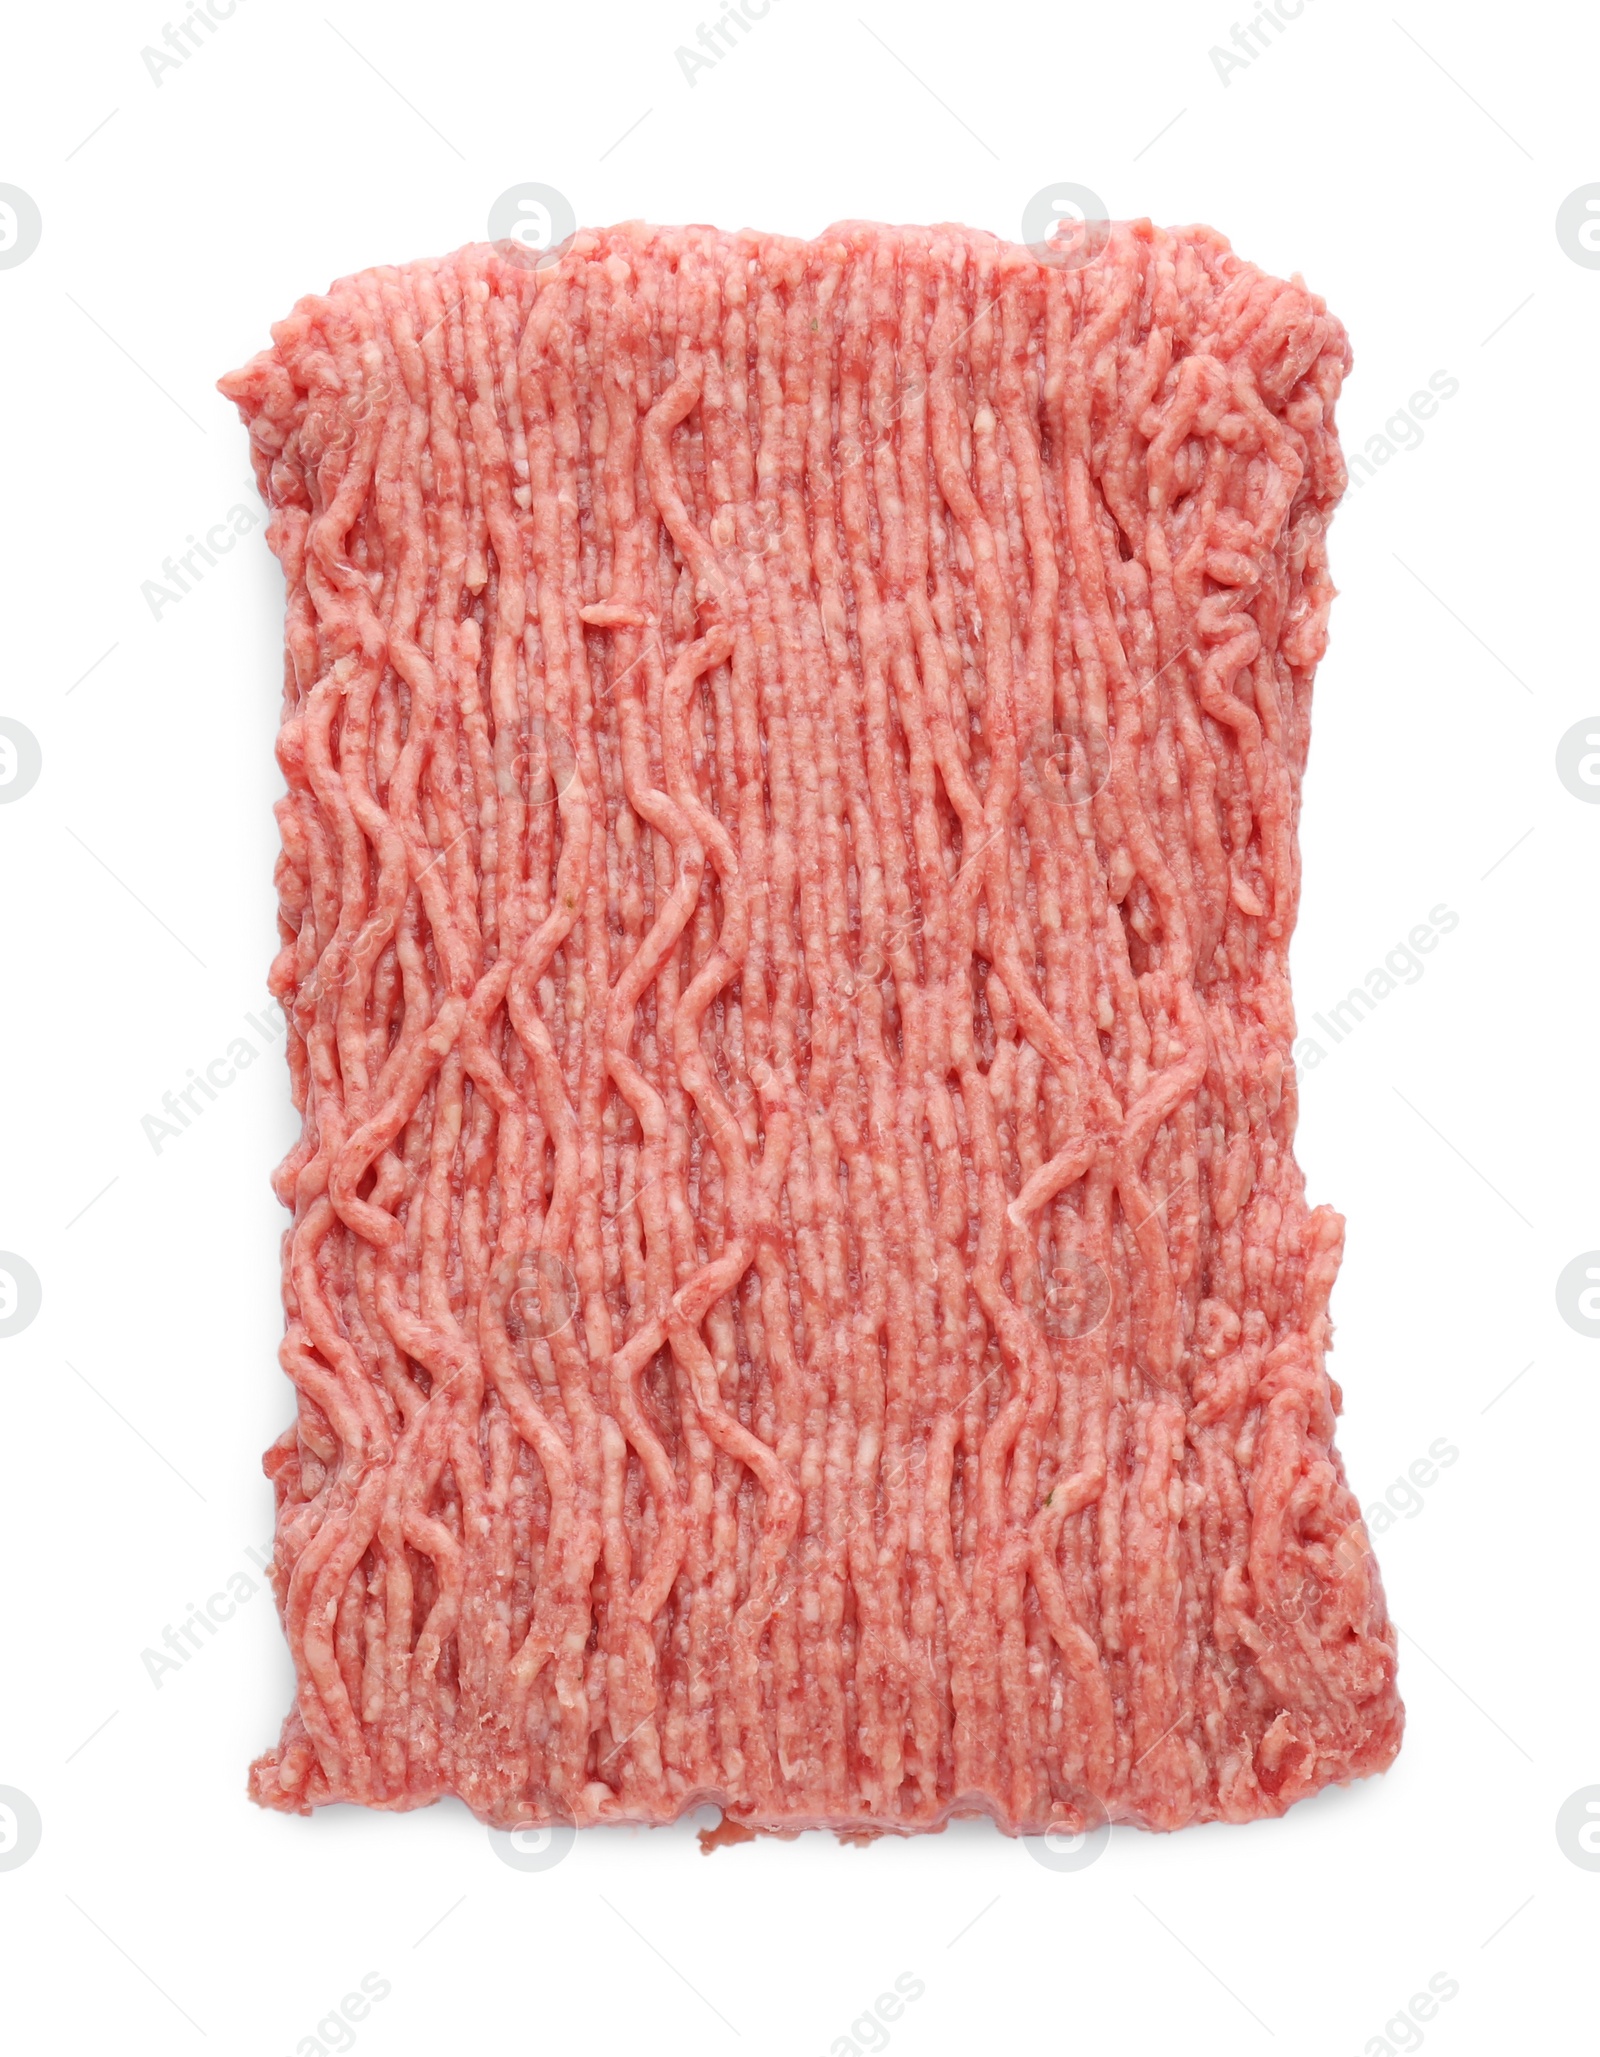 Photo of Raw fresh minced meat isolated on white, top view